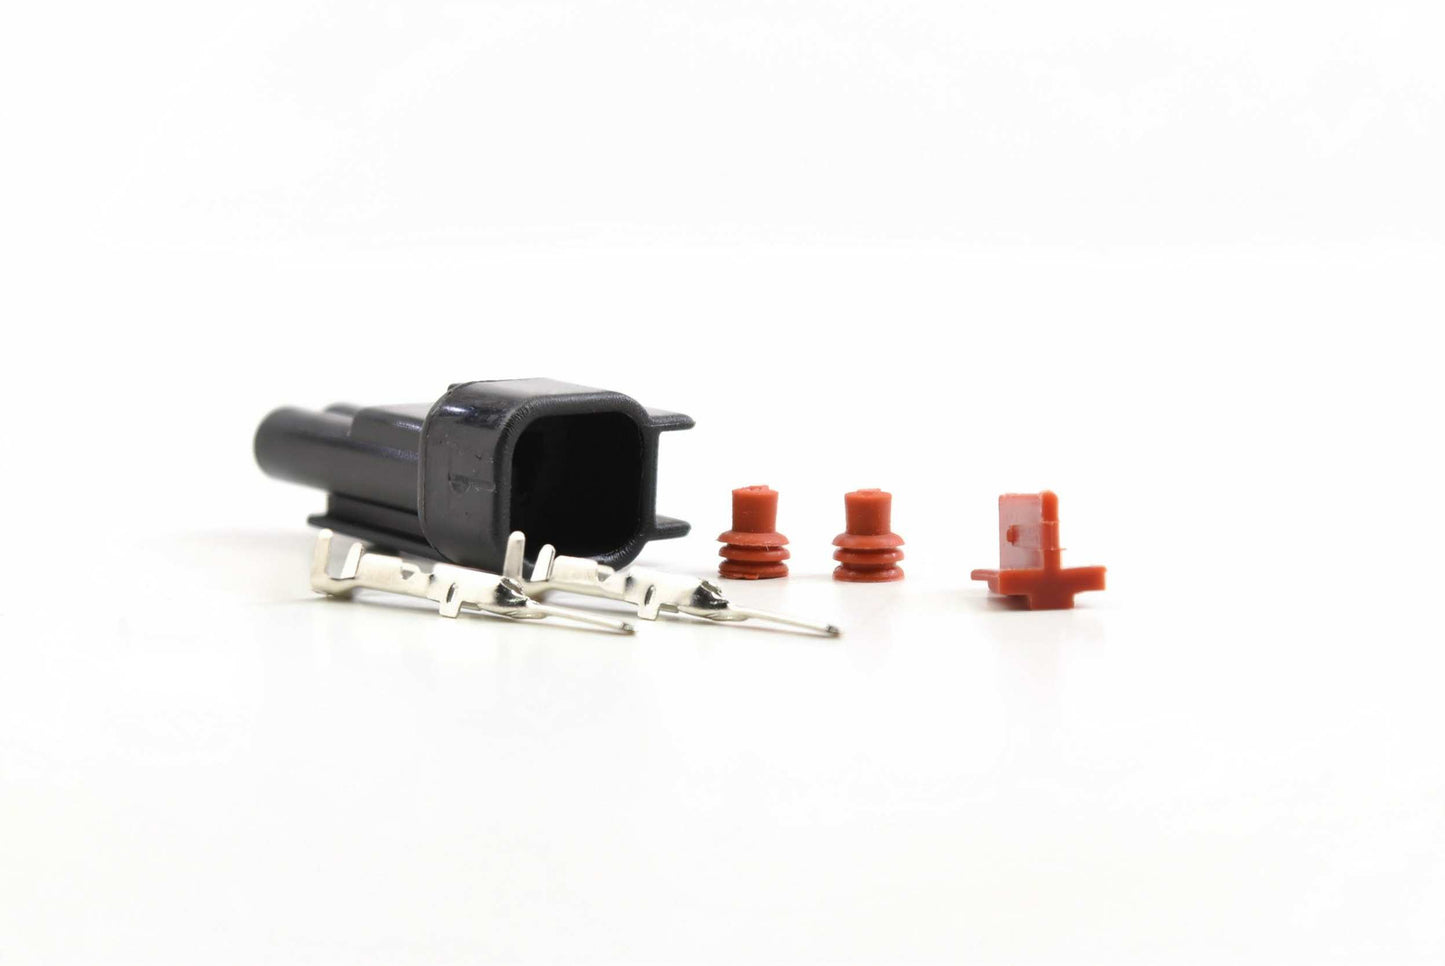 Connector: T10 Ford Parking Light Male